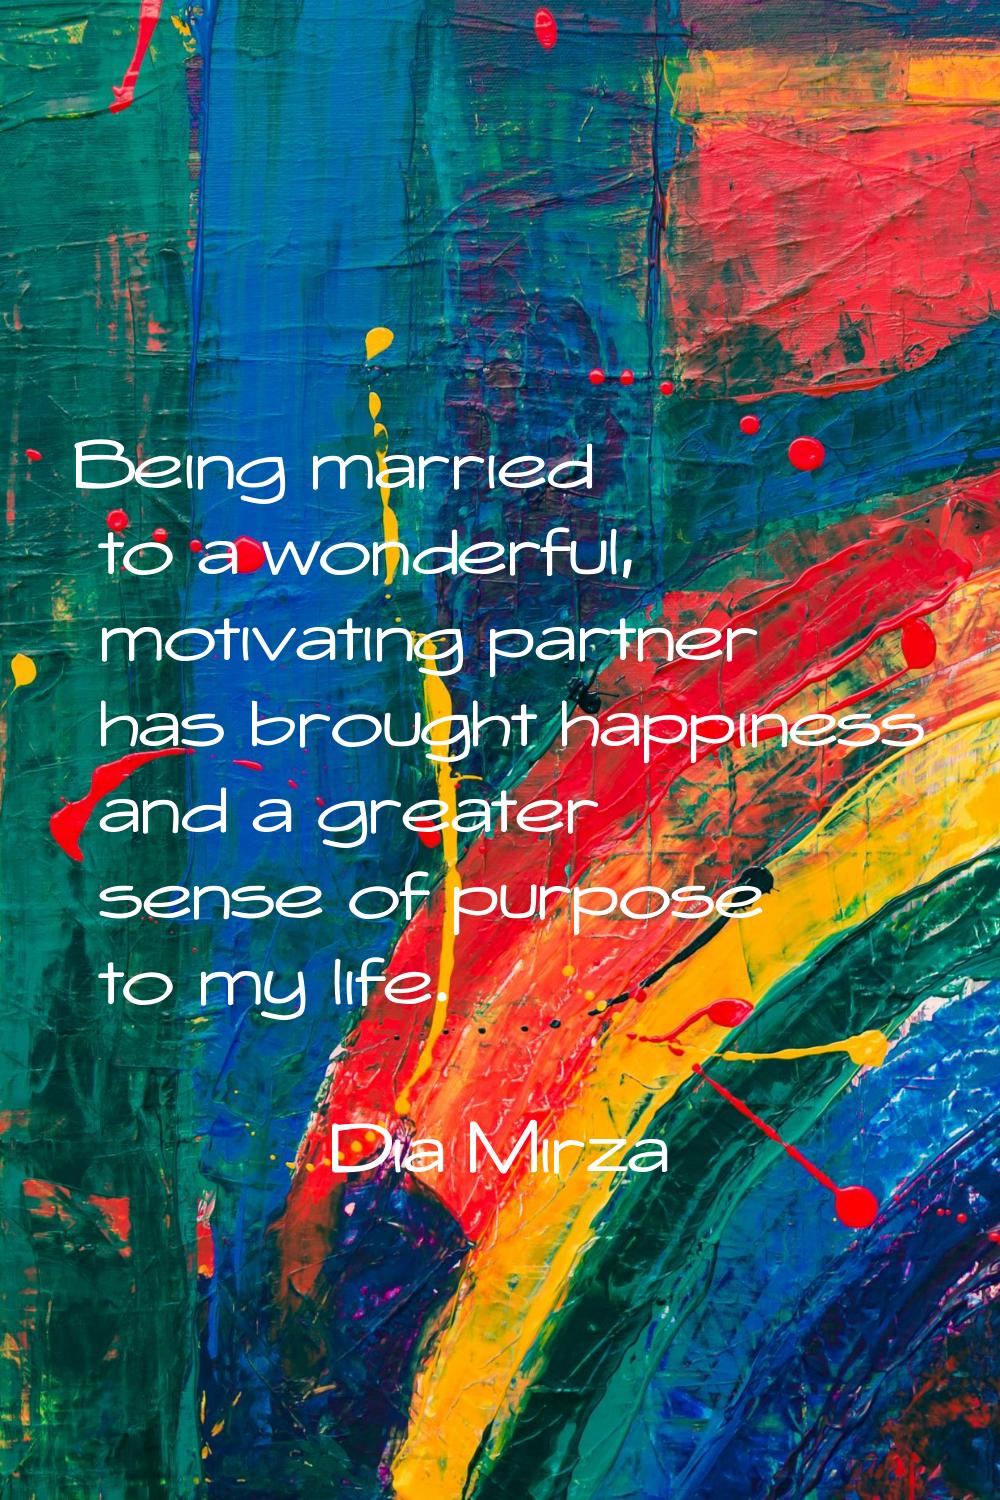 Being married to a wonderful, motivating partner has brought happiness and a greater sense of purpo